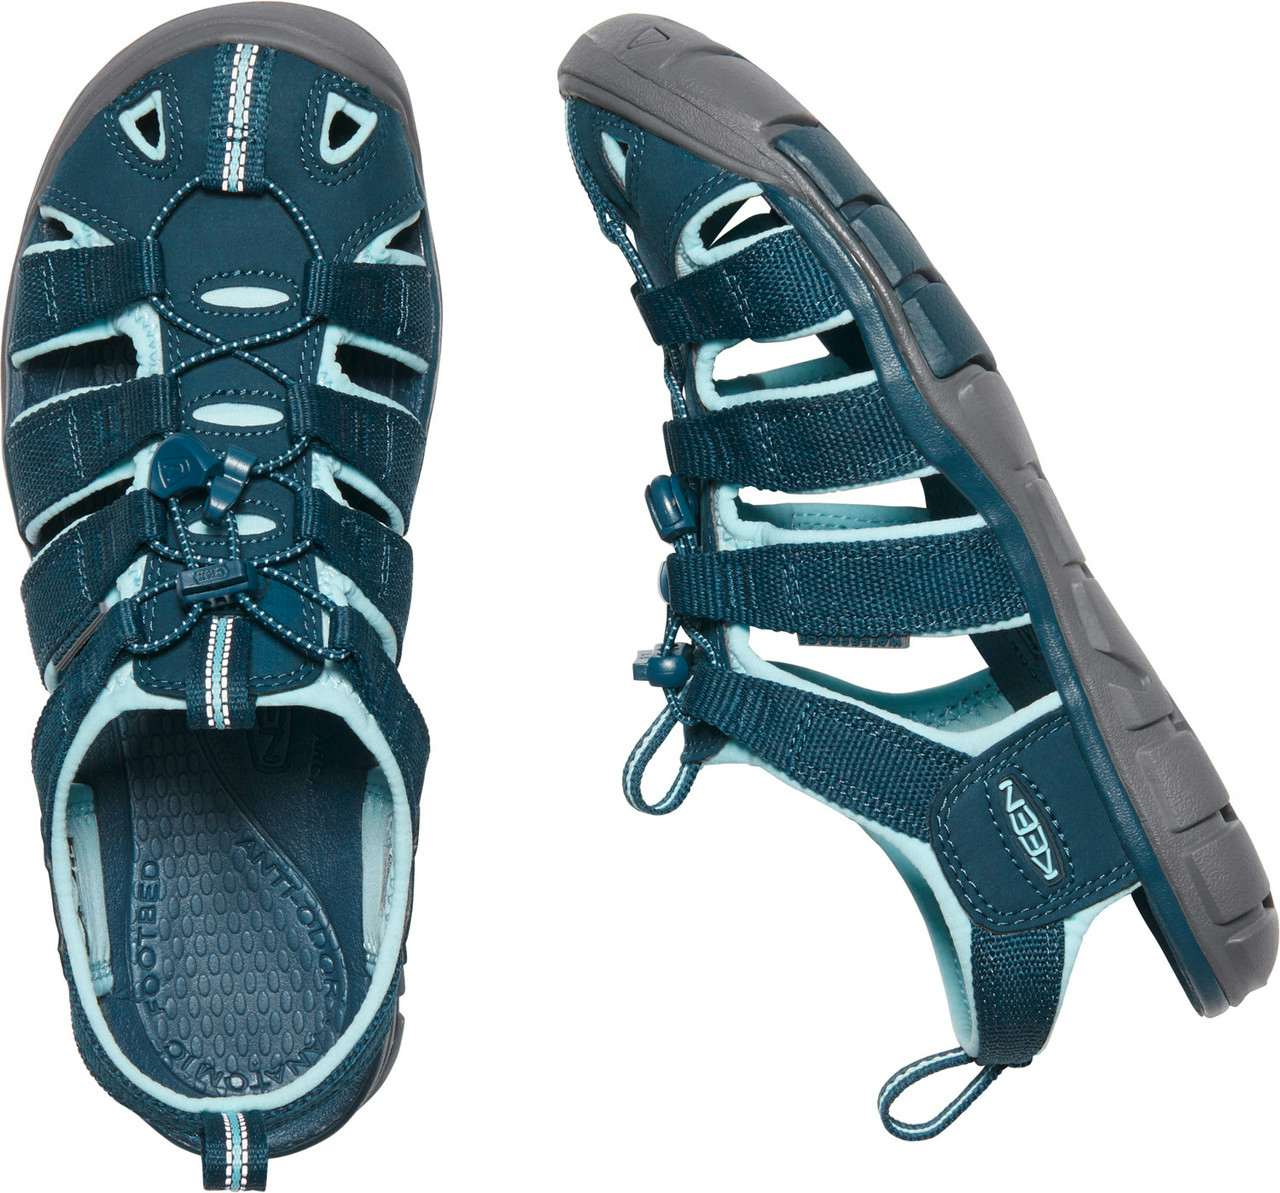 Clearwater CNX Sandals Navy/Blue Glow